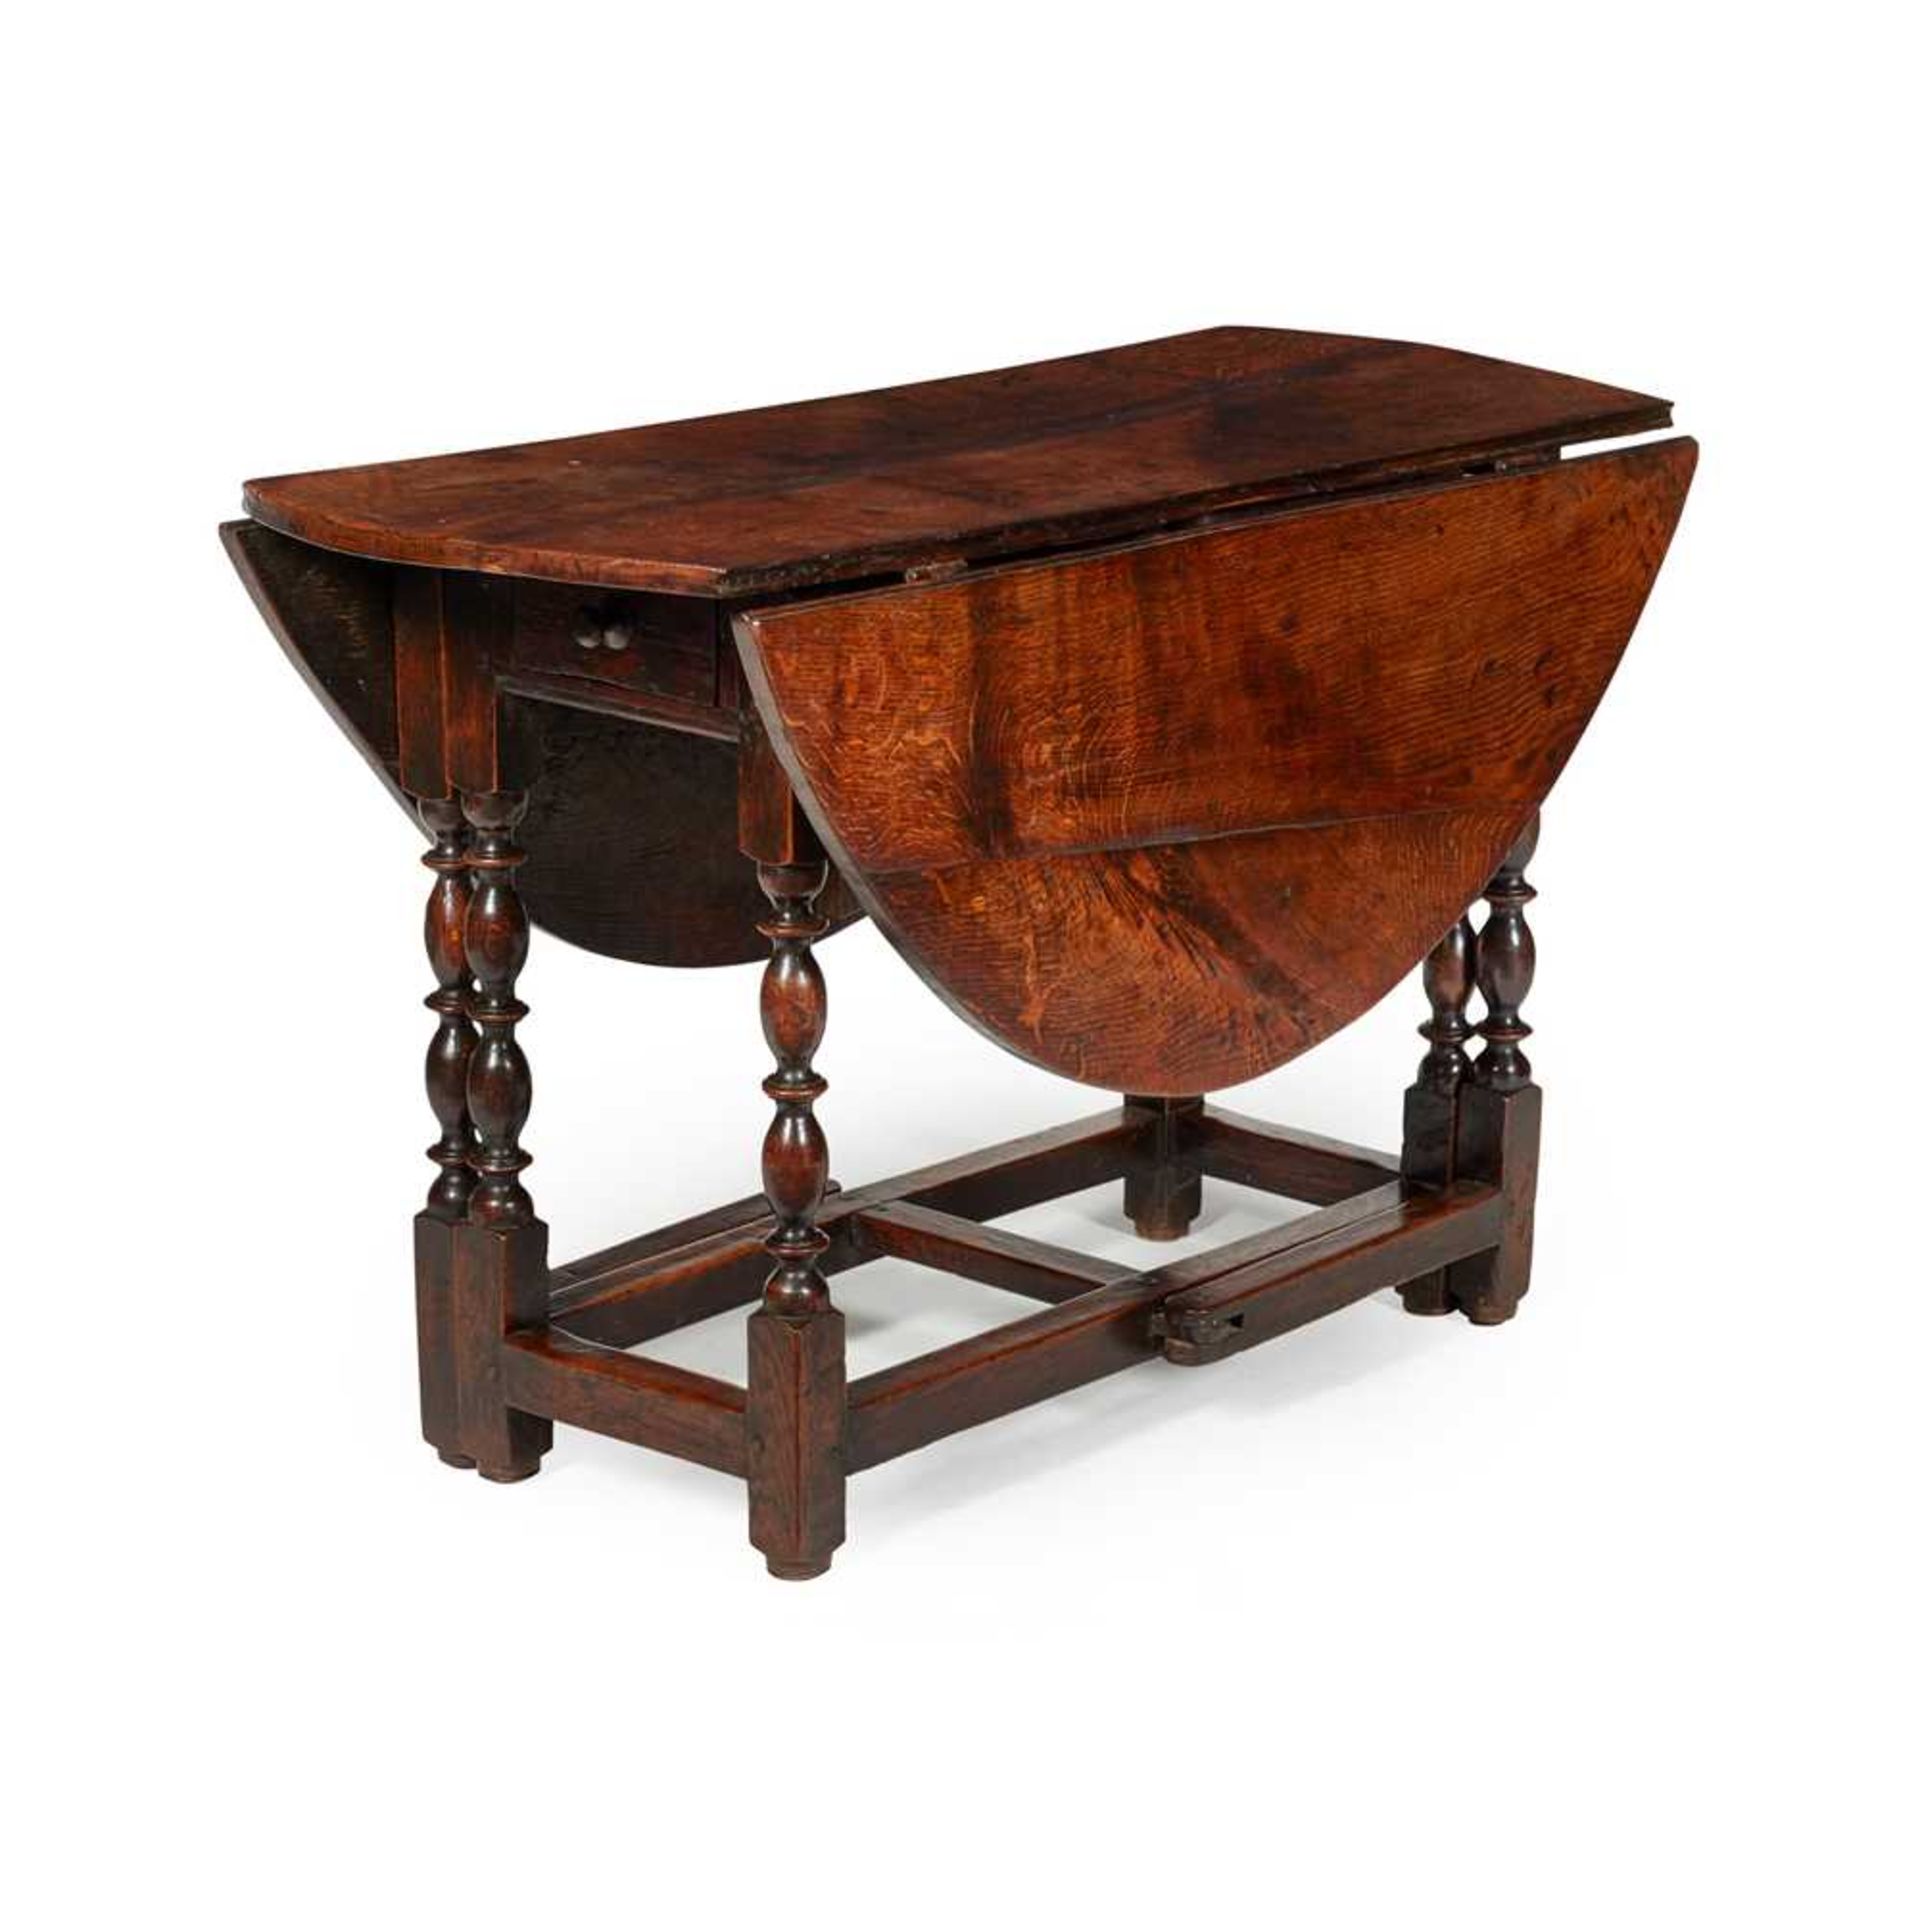 WILLIAM AND MARY OAK GATELEG TABLE EARLY 18TH CENTURY